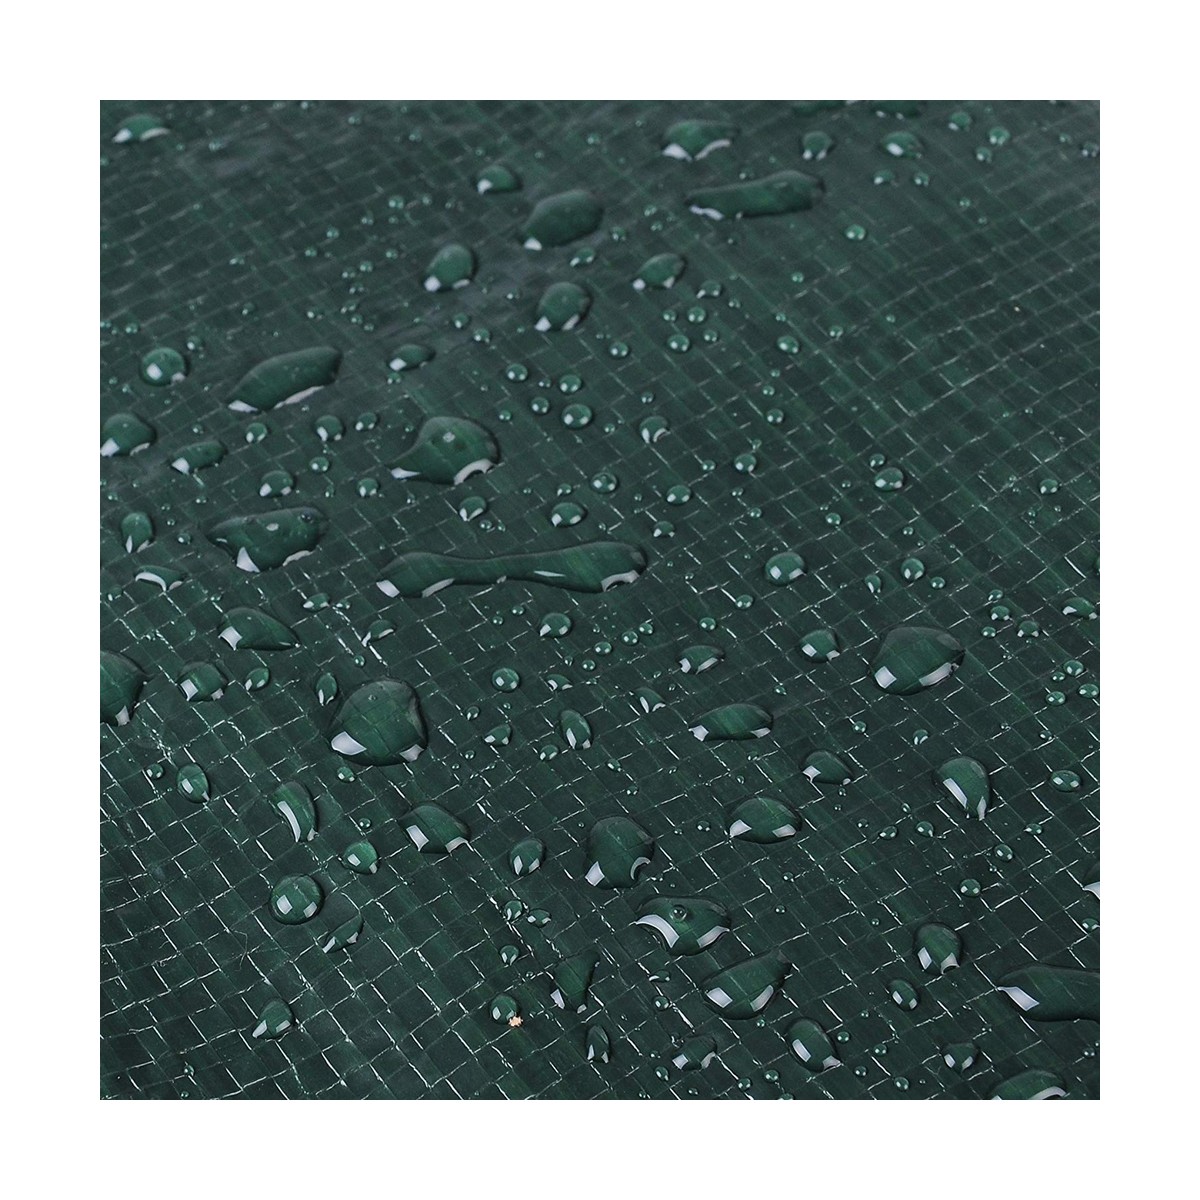 Protective Cover for Barbecue Altadex Polyethylene Green